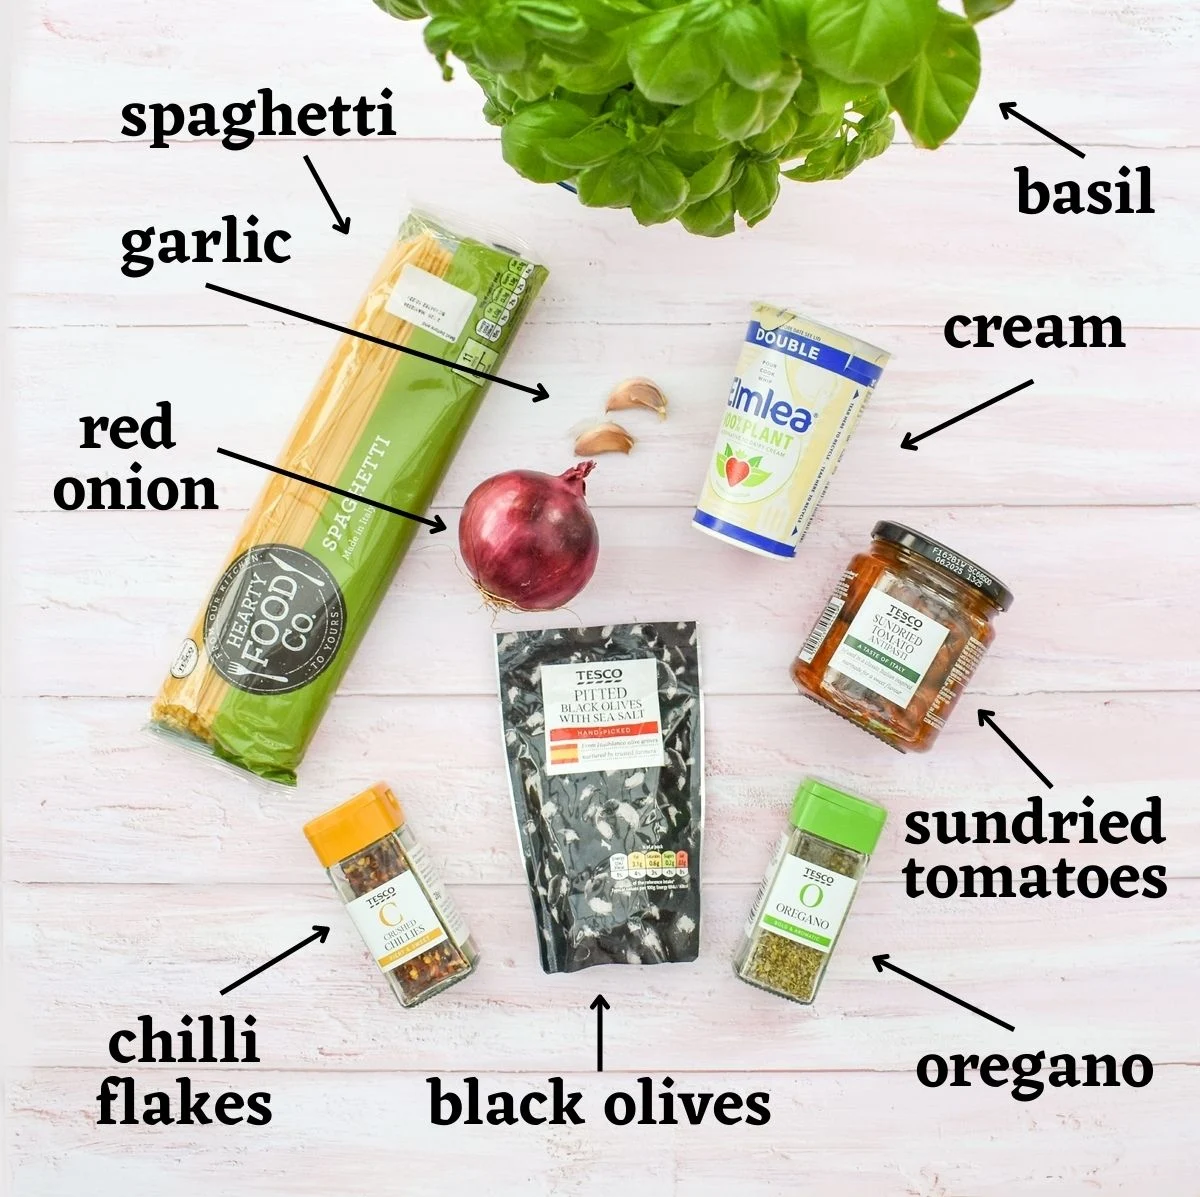 ingredients for sundried tomato spaghetti.